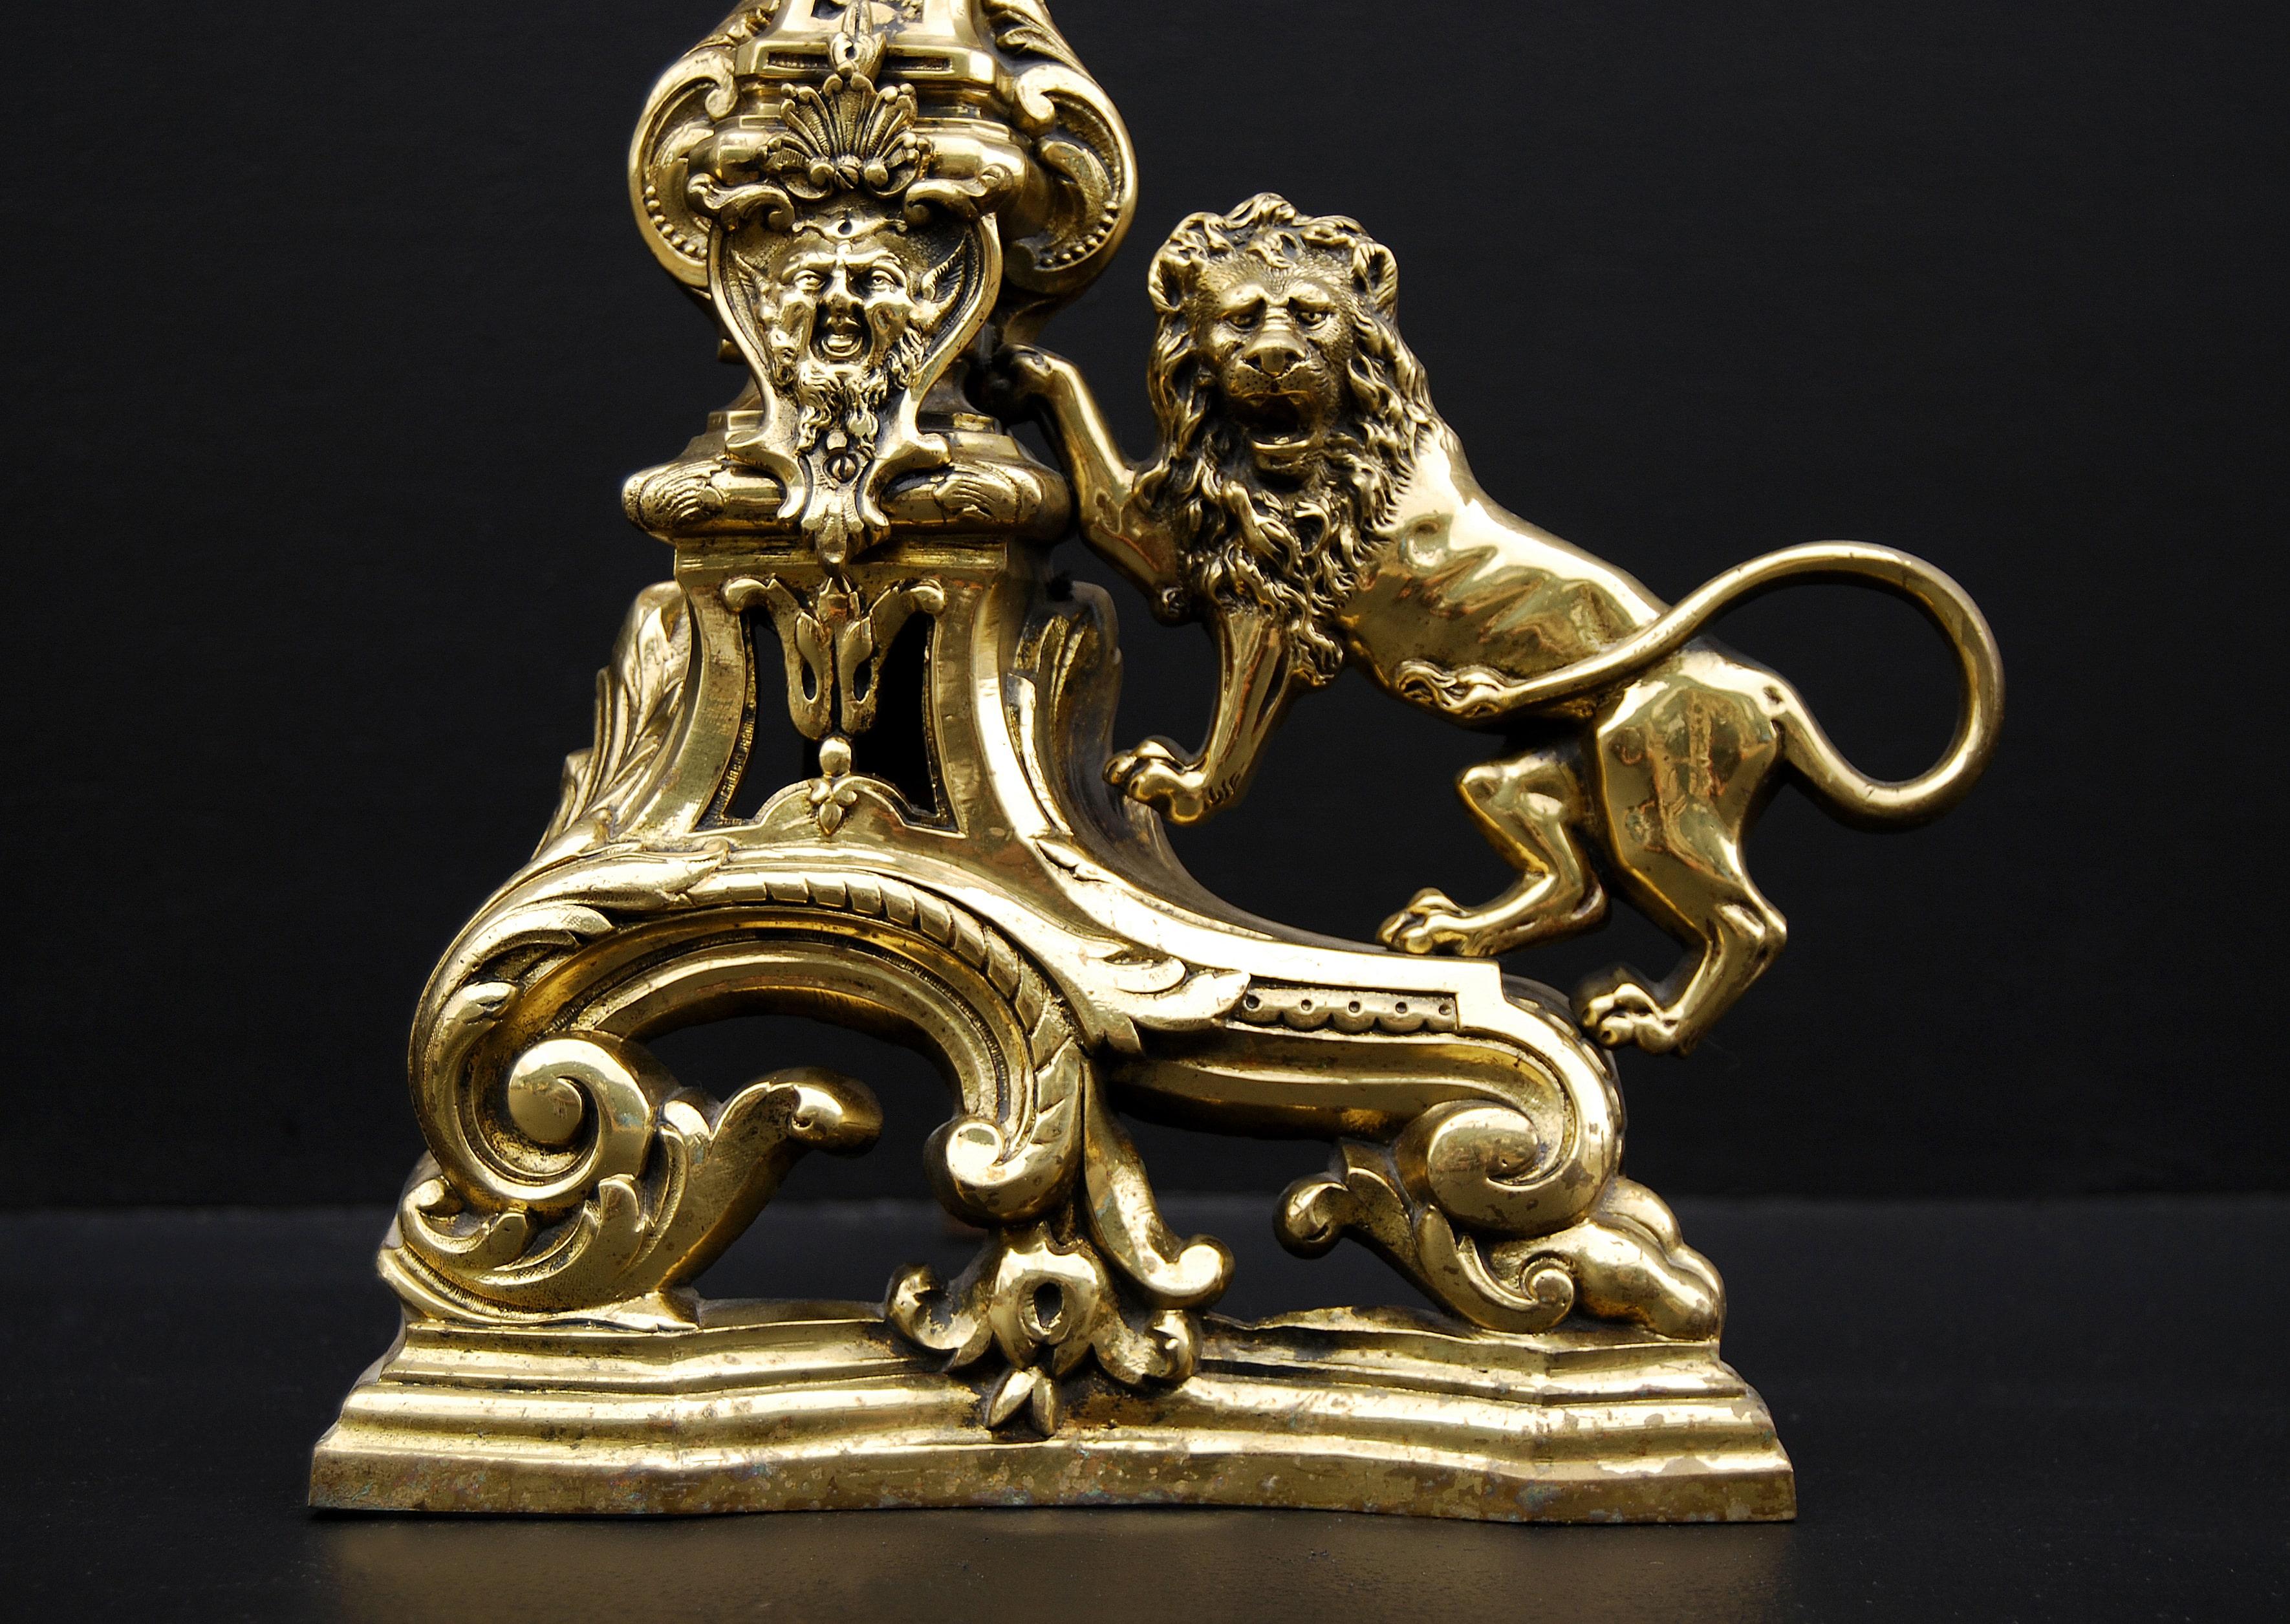 Pair of 20th century French brass firedogs with pinnacle and with lion design to the side.

Measures: Height: 405 mm 16